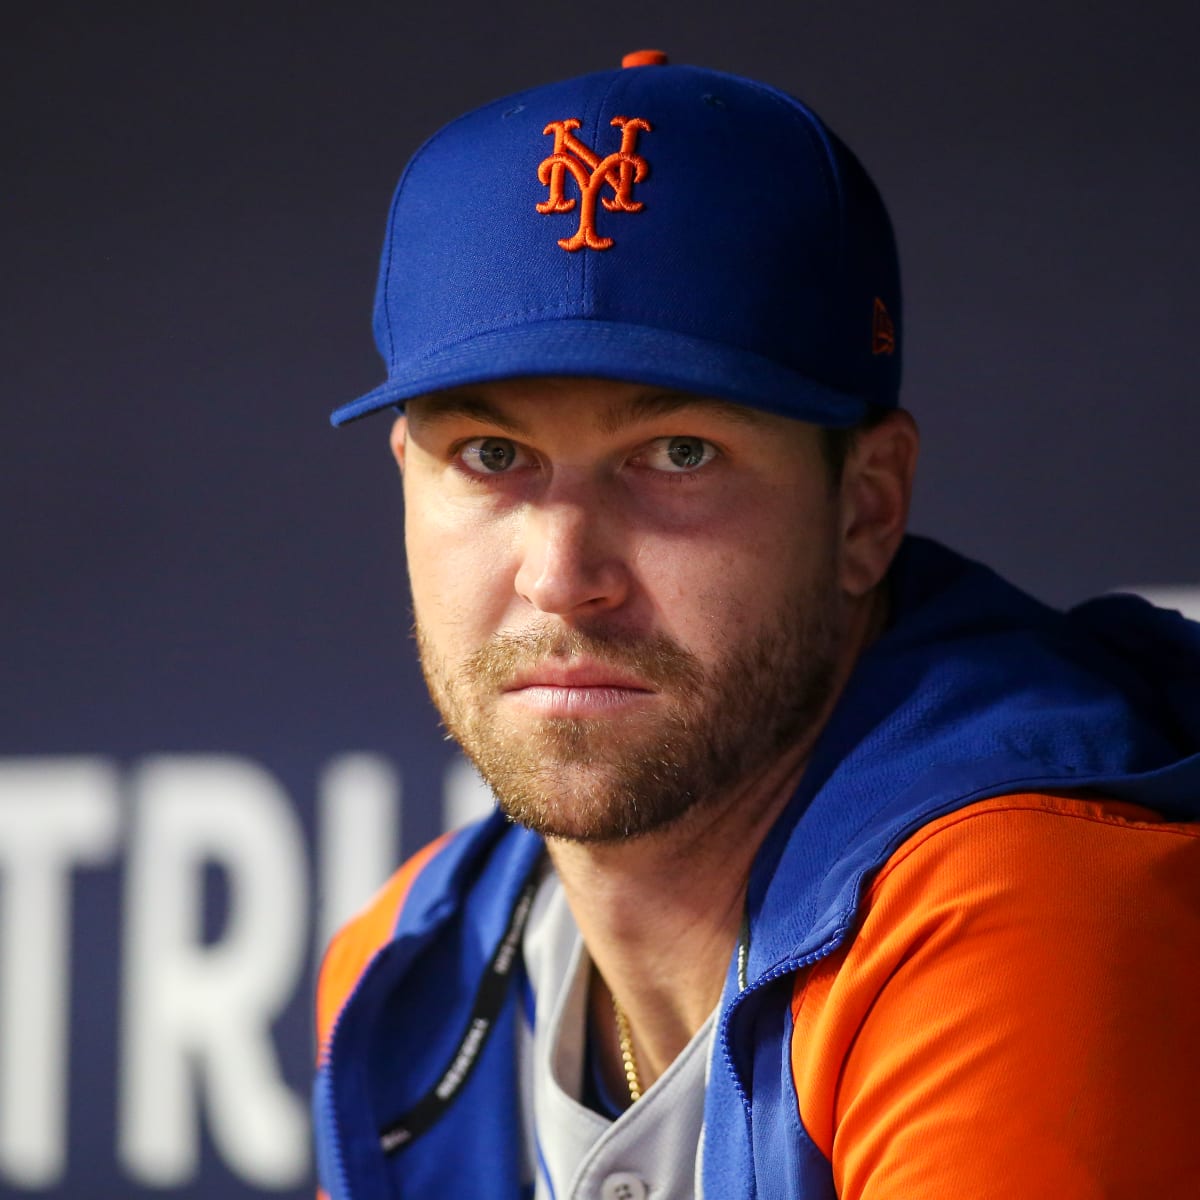 Rangers say deGrom is 'determined to succeed into his late 30s